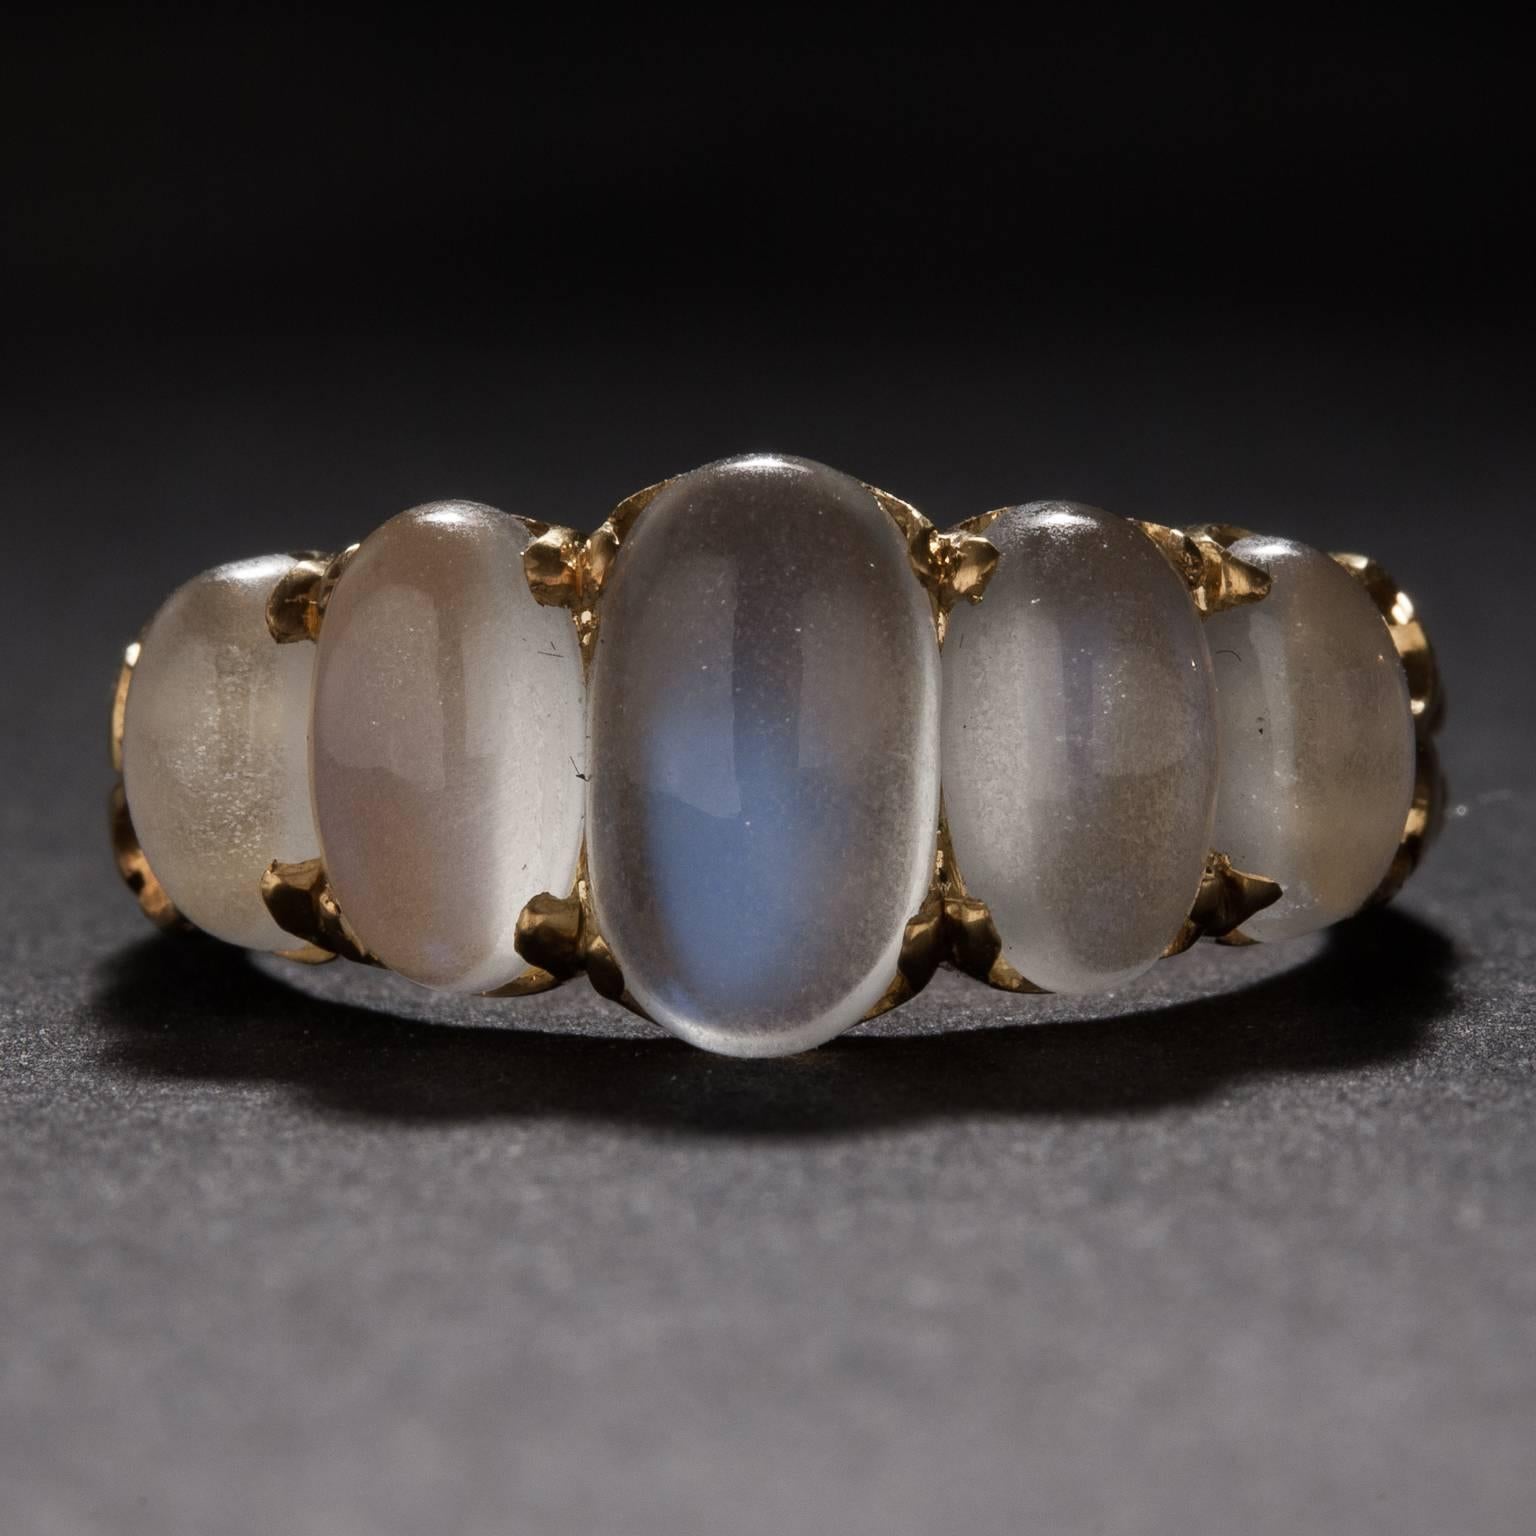 This lovely ring features 5 moonstones for a total of 3.79 carats. It is crafted in 15k yellow gold and it is currently size 6.5.